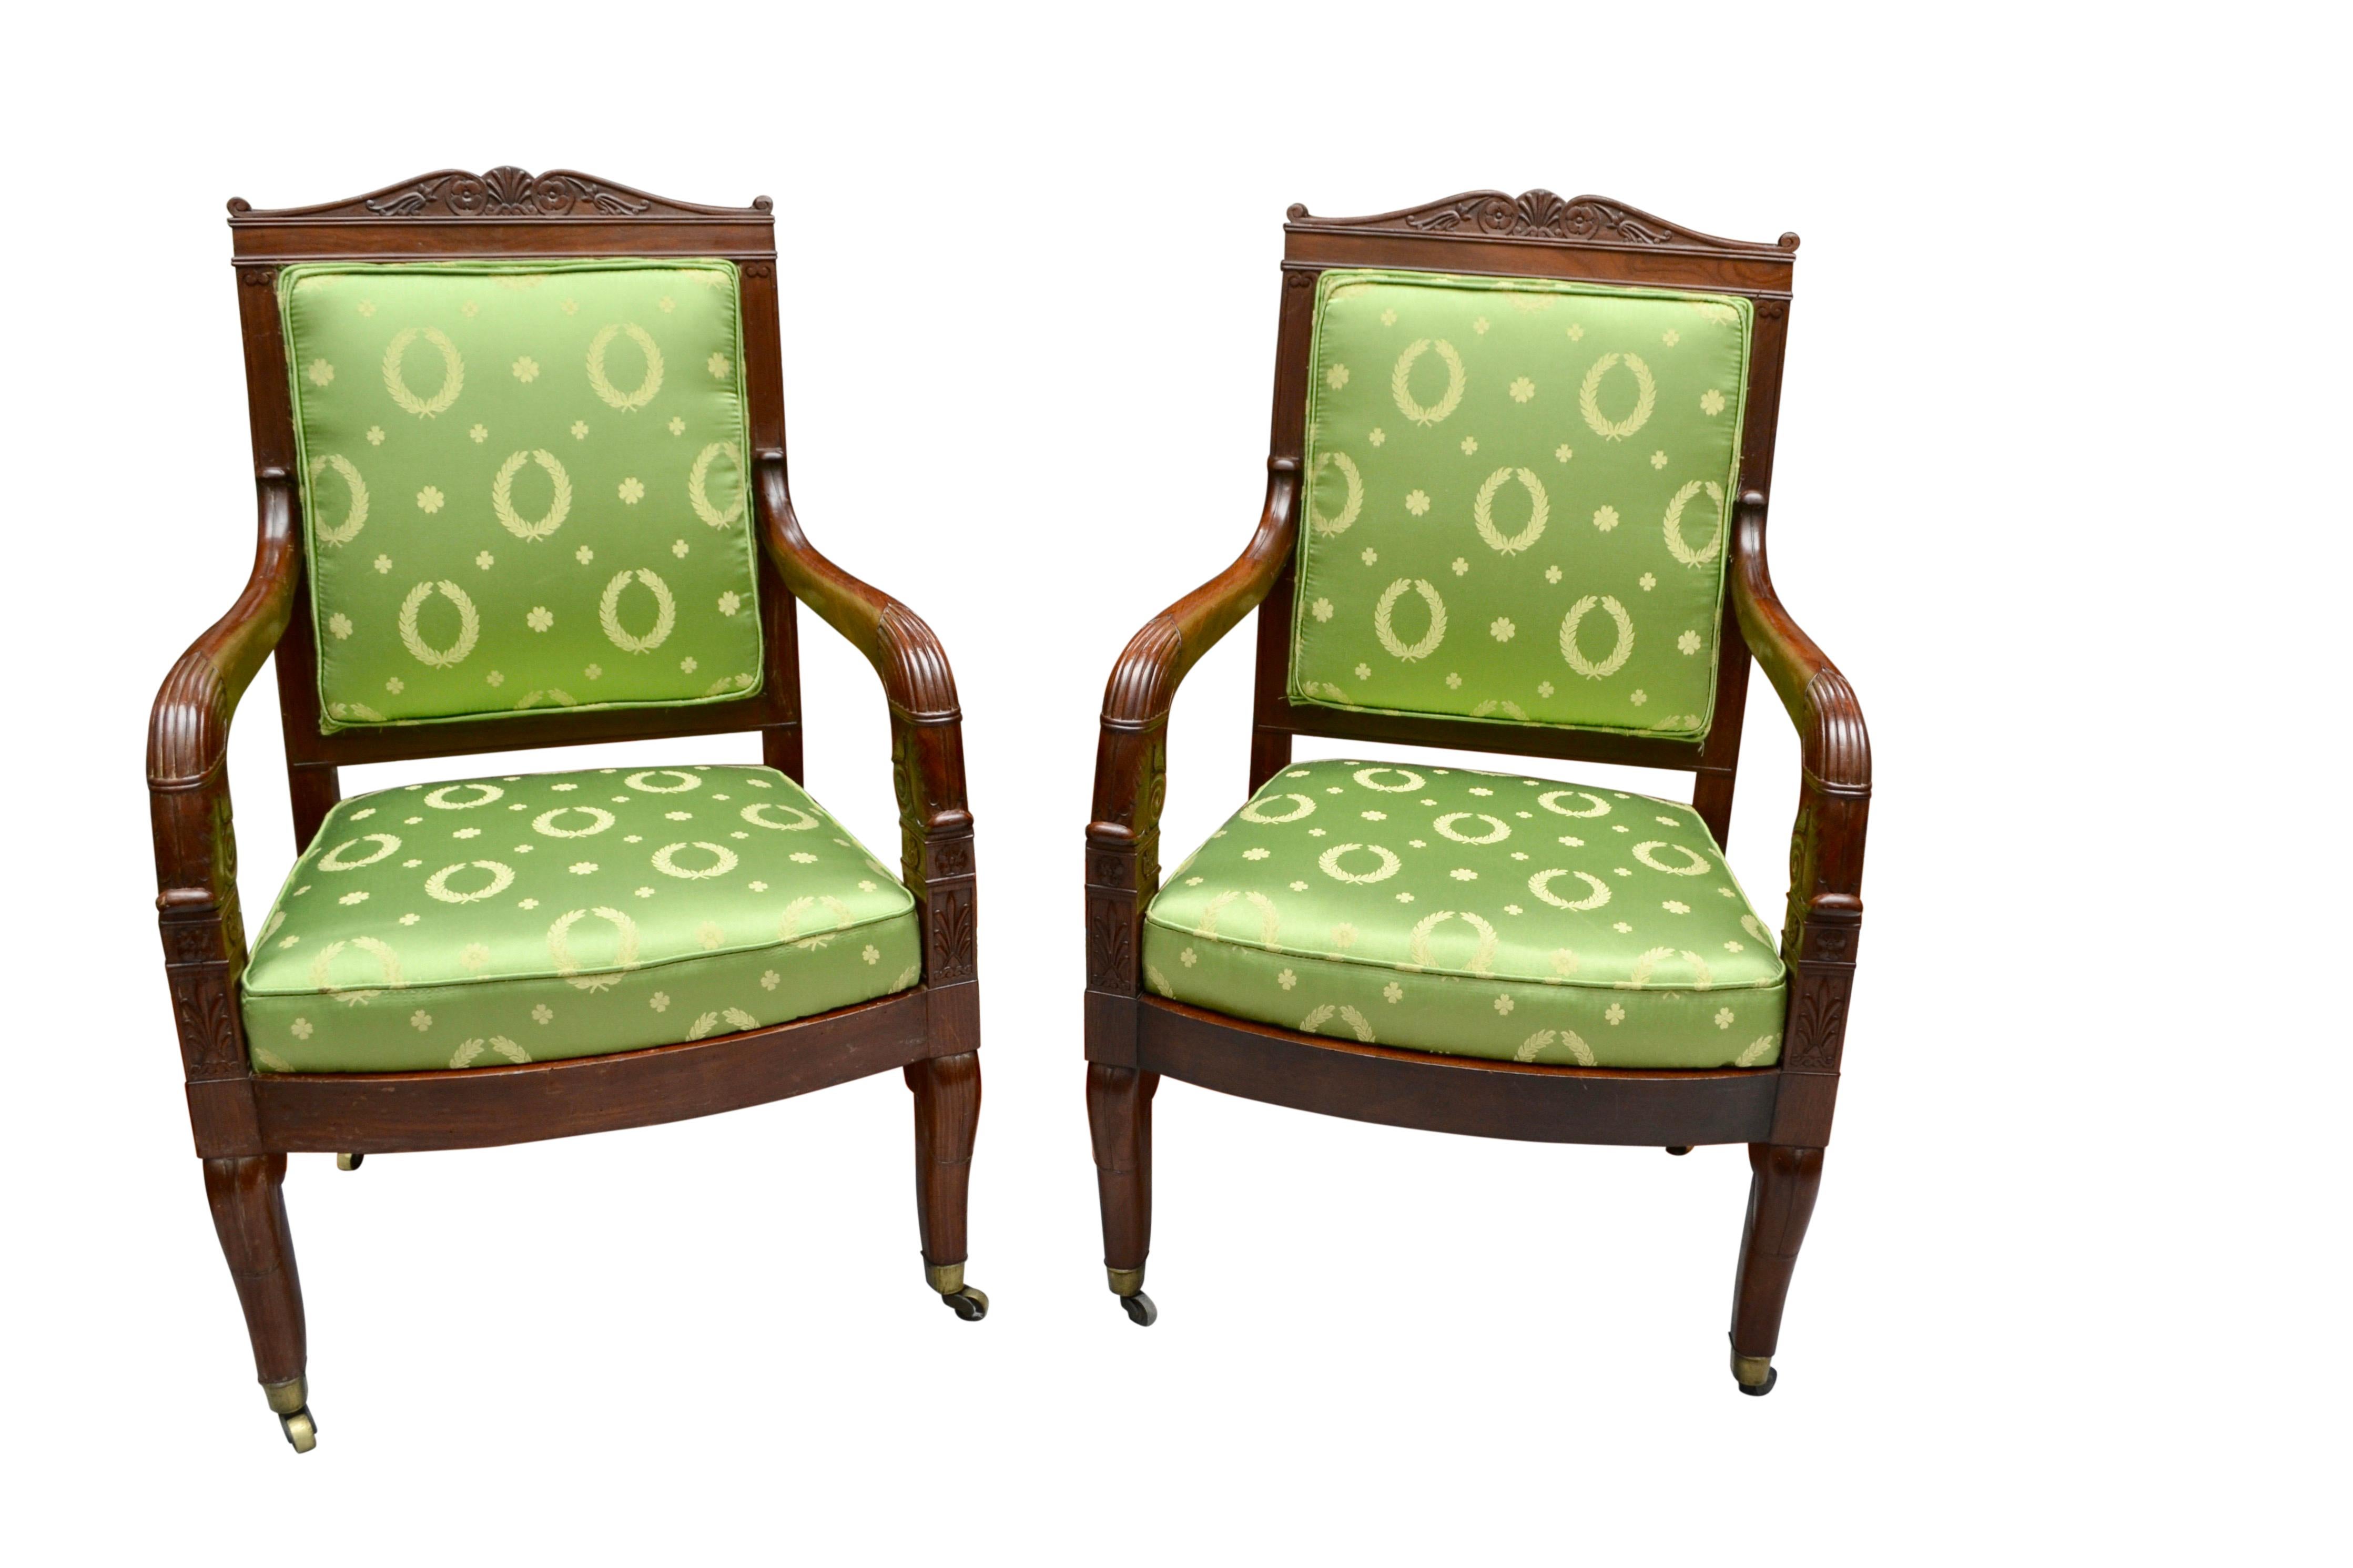 A classic pair of French Empire period open armchairs in well figured and carved mahogany; each with a square back topped by a bow shaped carved frieze featuring folliate rosettes and downscrolled arms. Where the arms join the chair rail there are